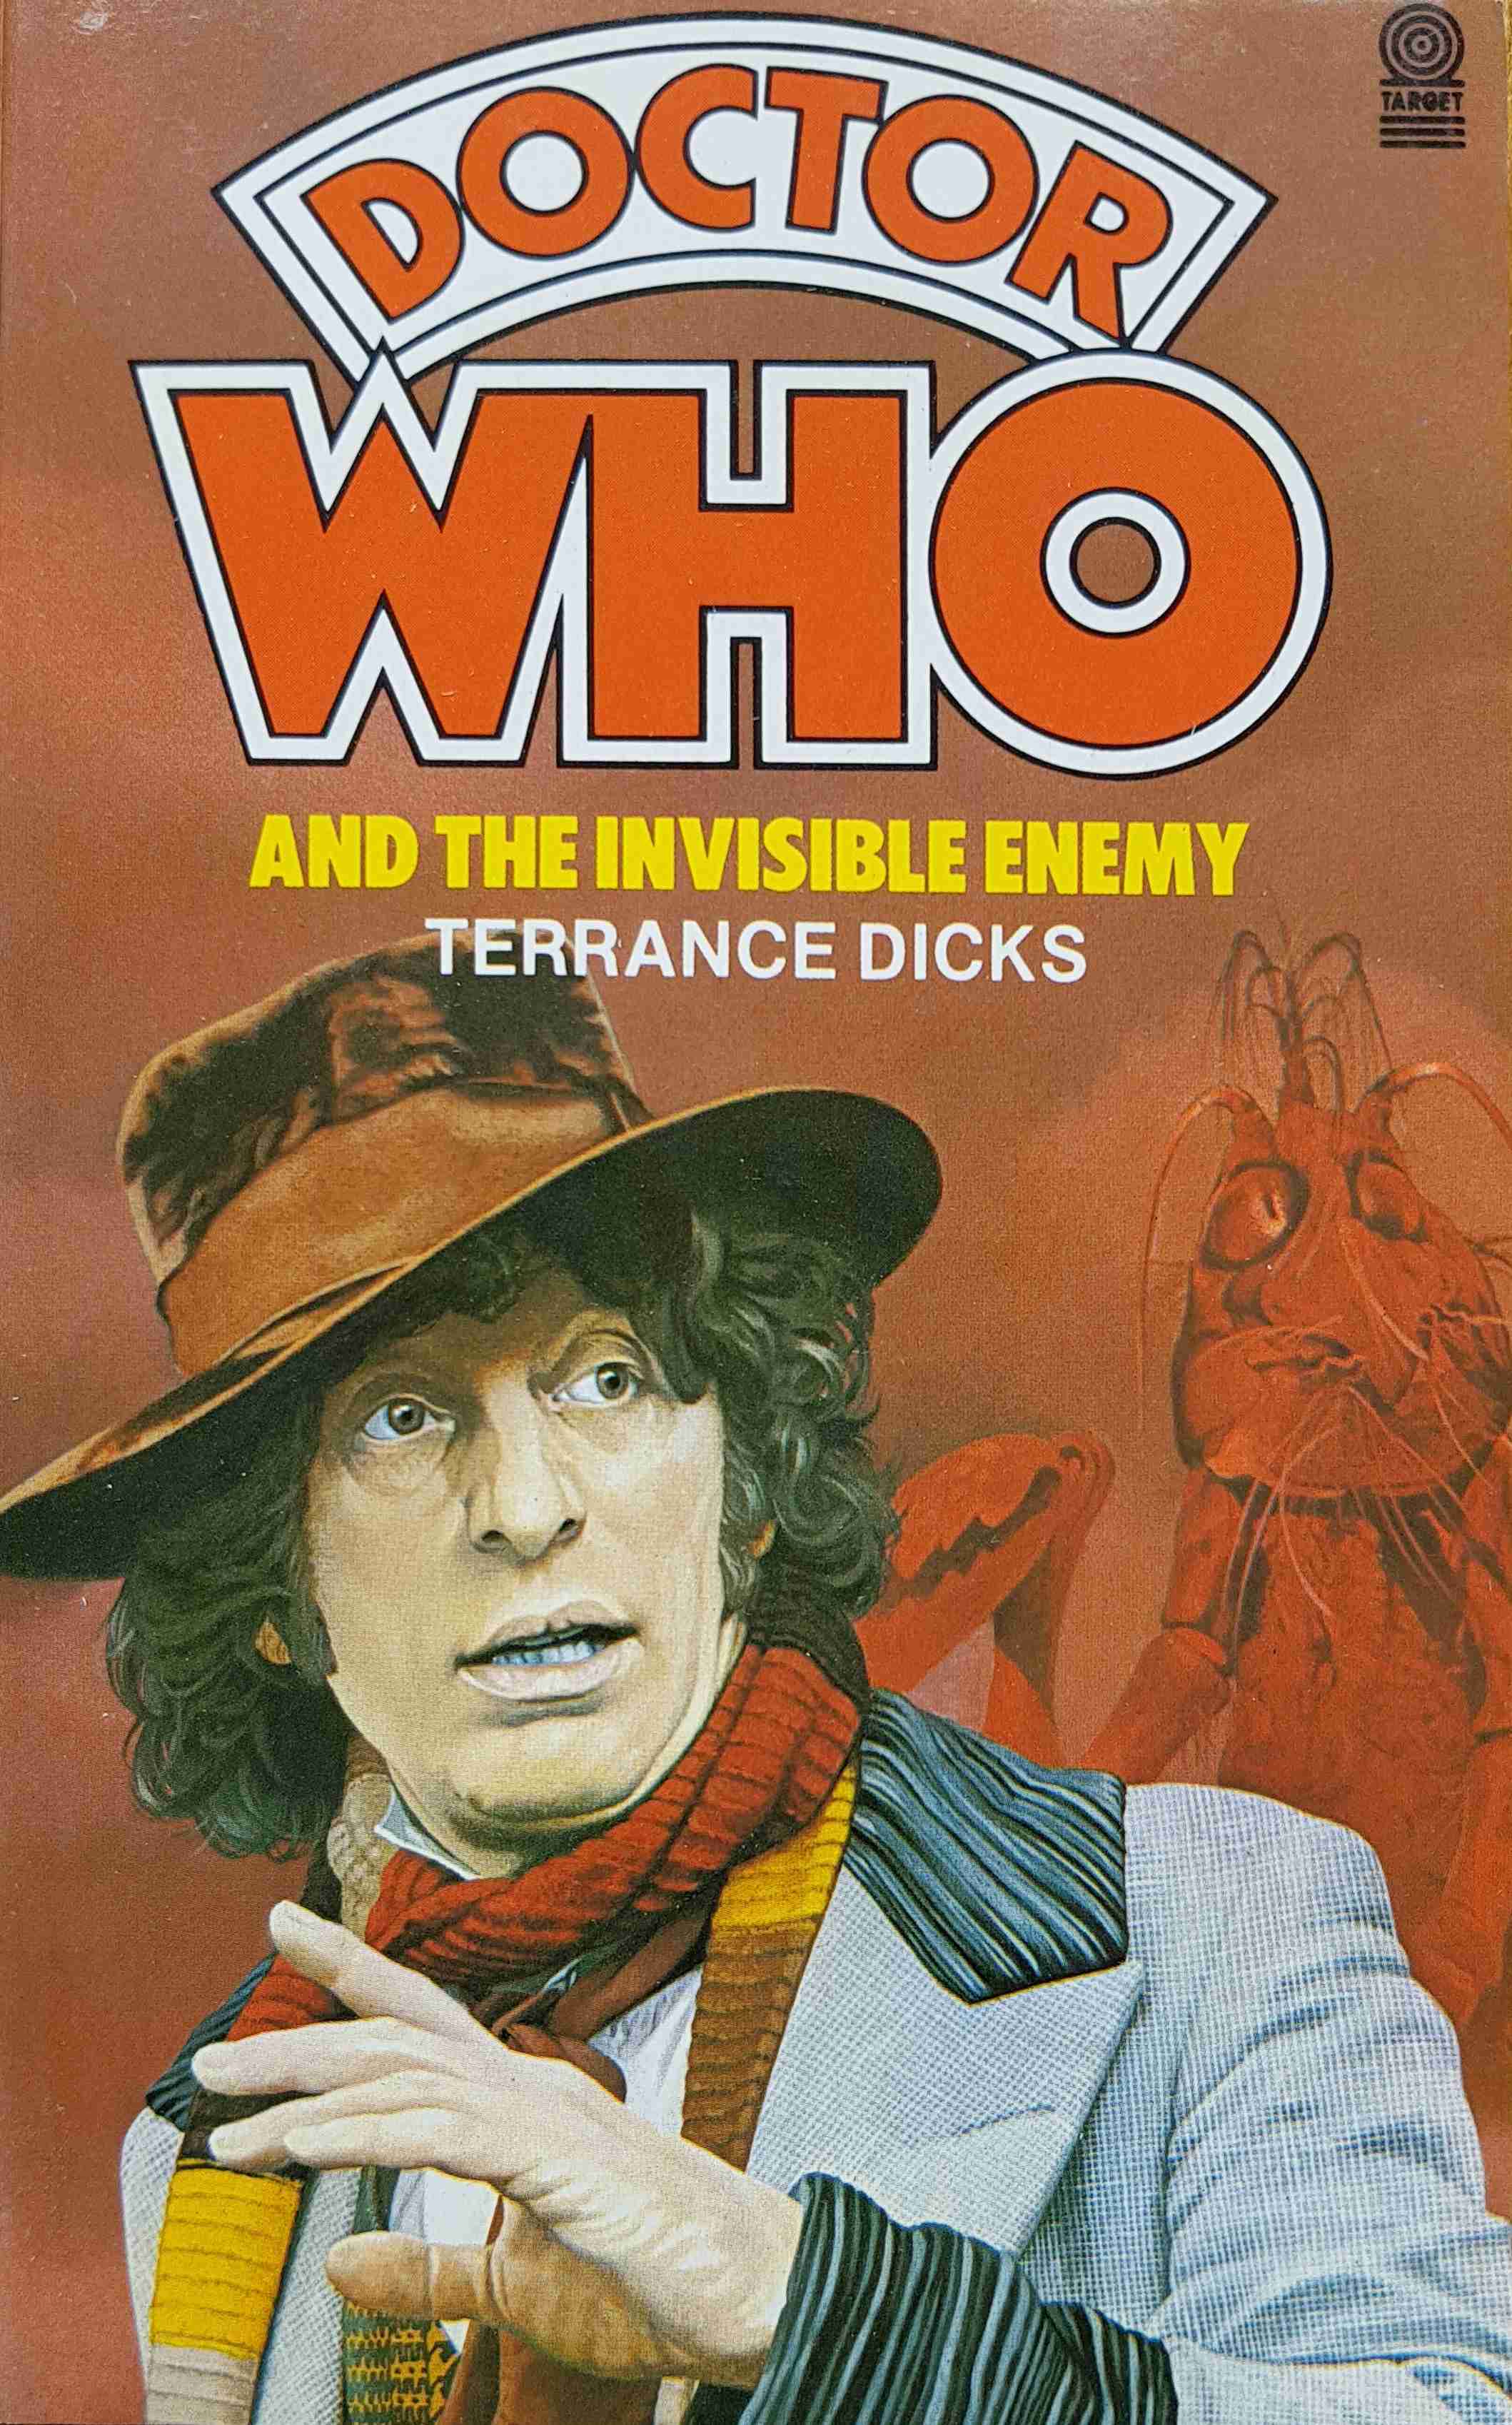 Picture of 0-426-20054-3 Doctor Who - The invisible enemy by artist Terrance Dicks from the BBC books - Records and Tapes library